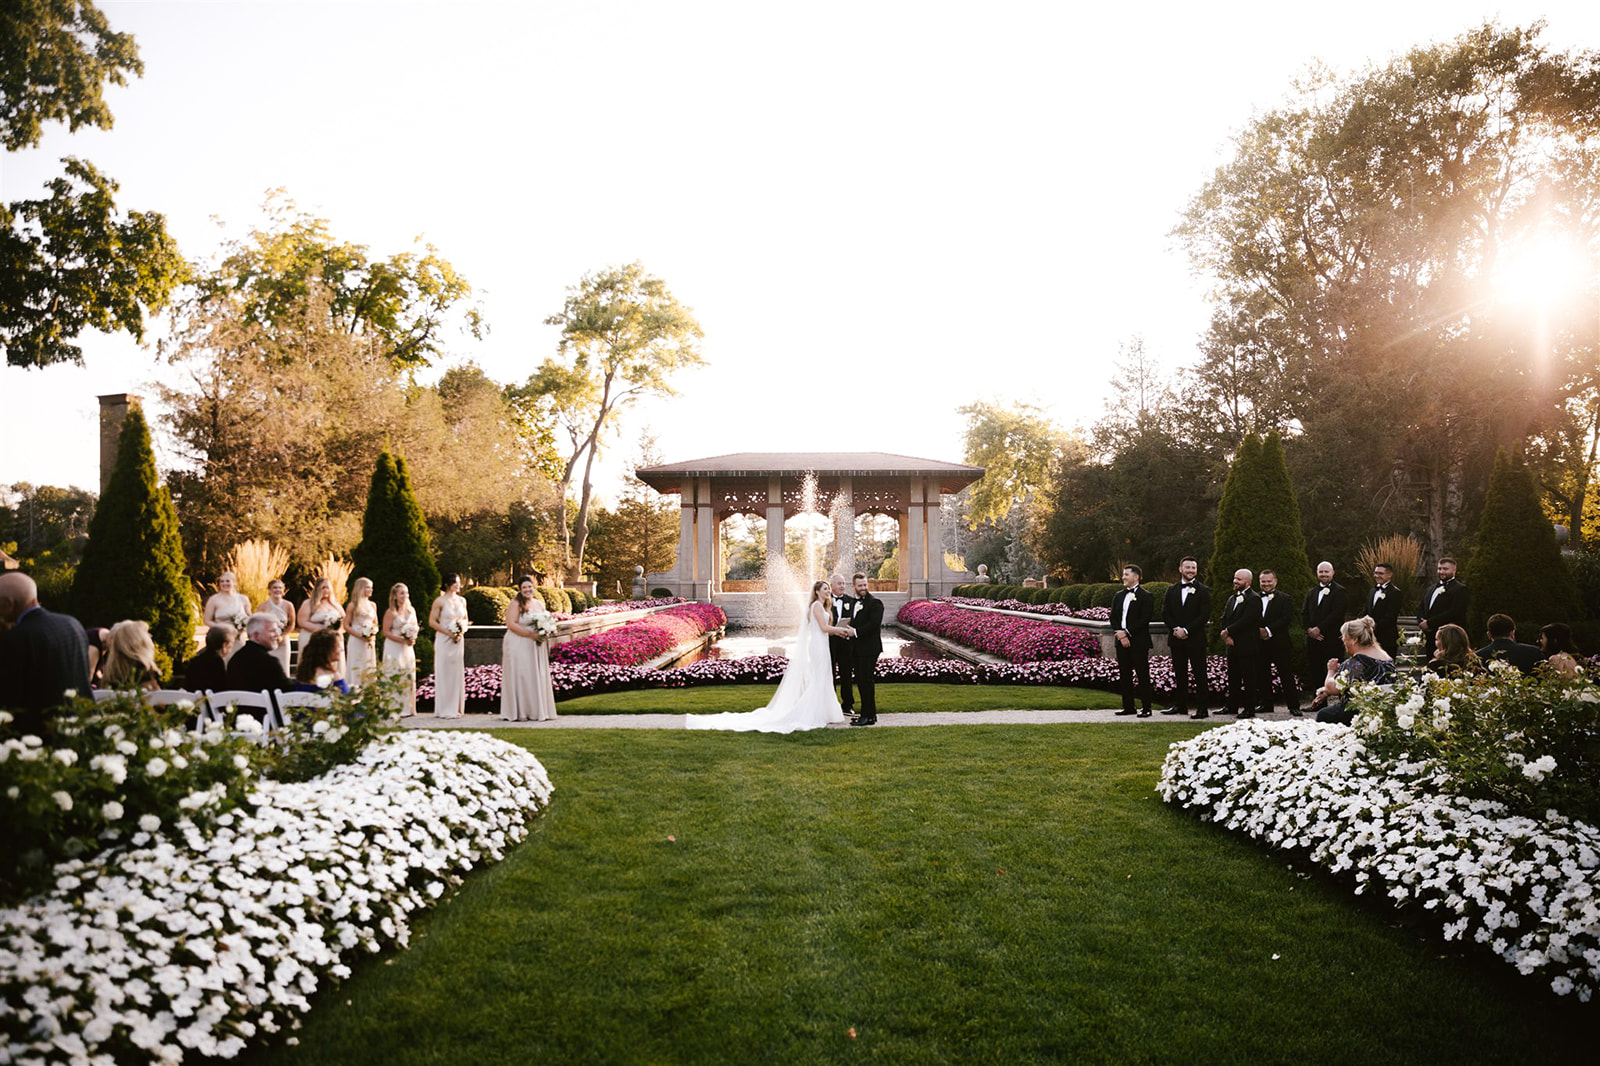 As the sun sets over Armour House, casting a golden glow, the ceremony takes on a magical and romantic ambiance.